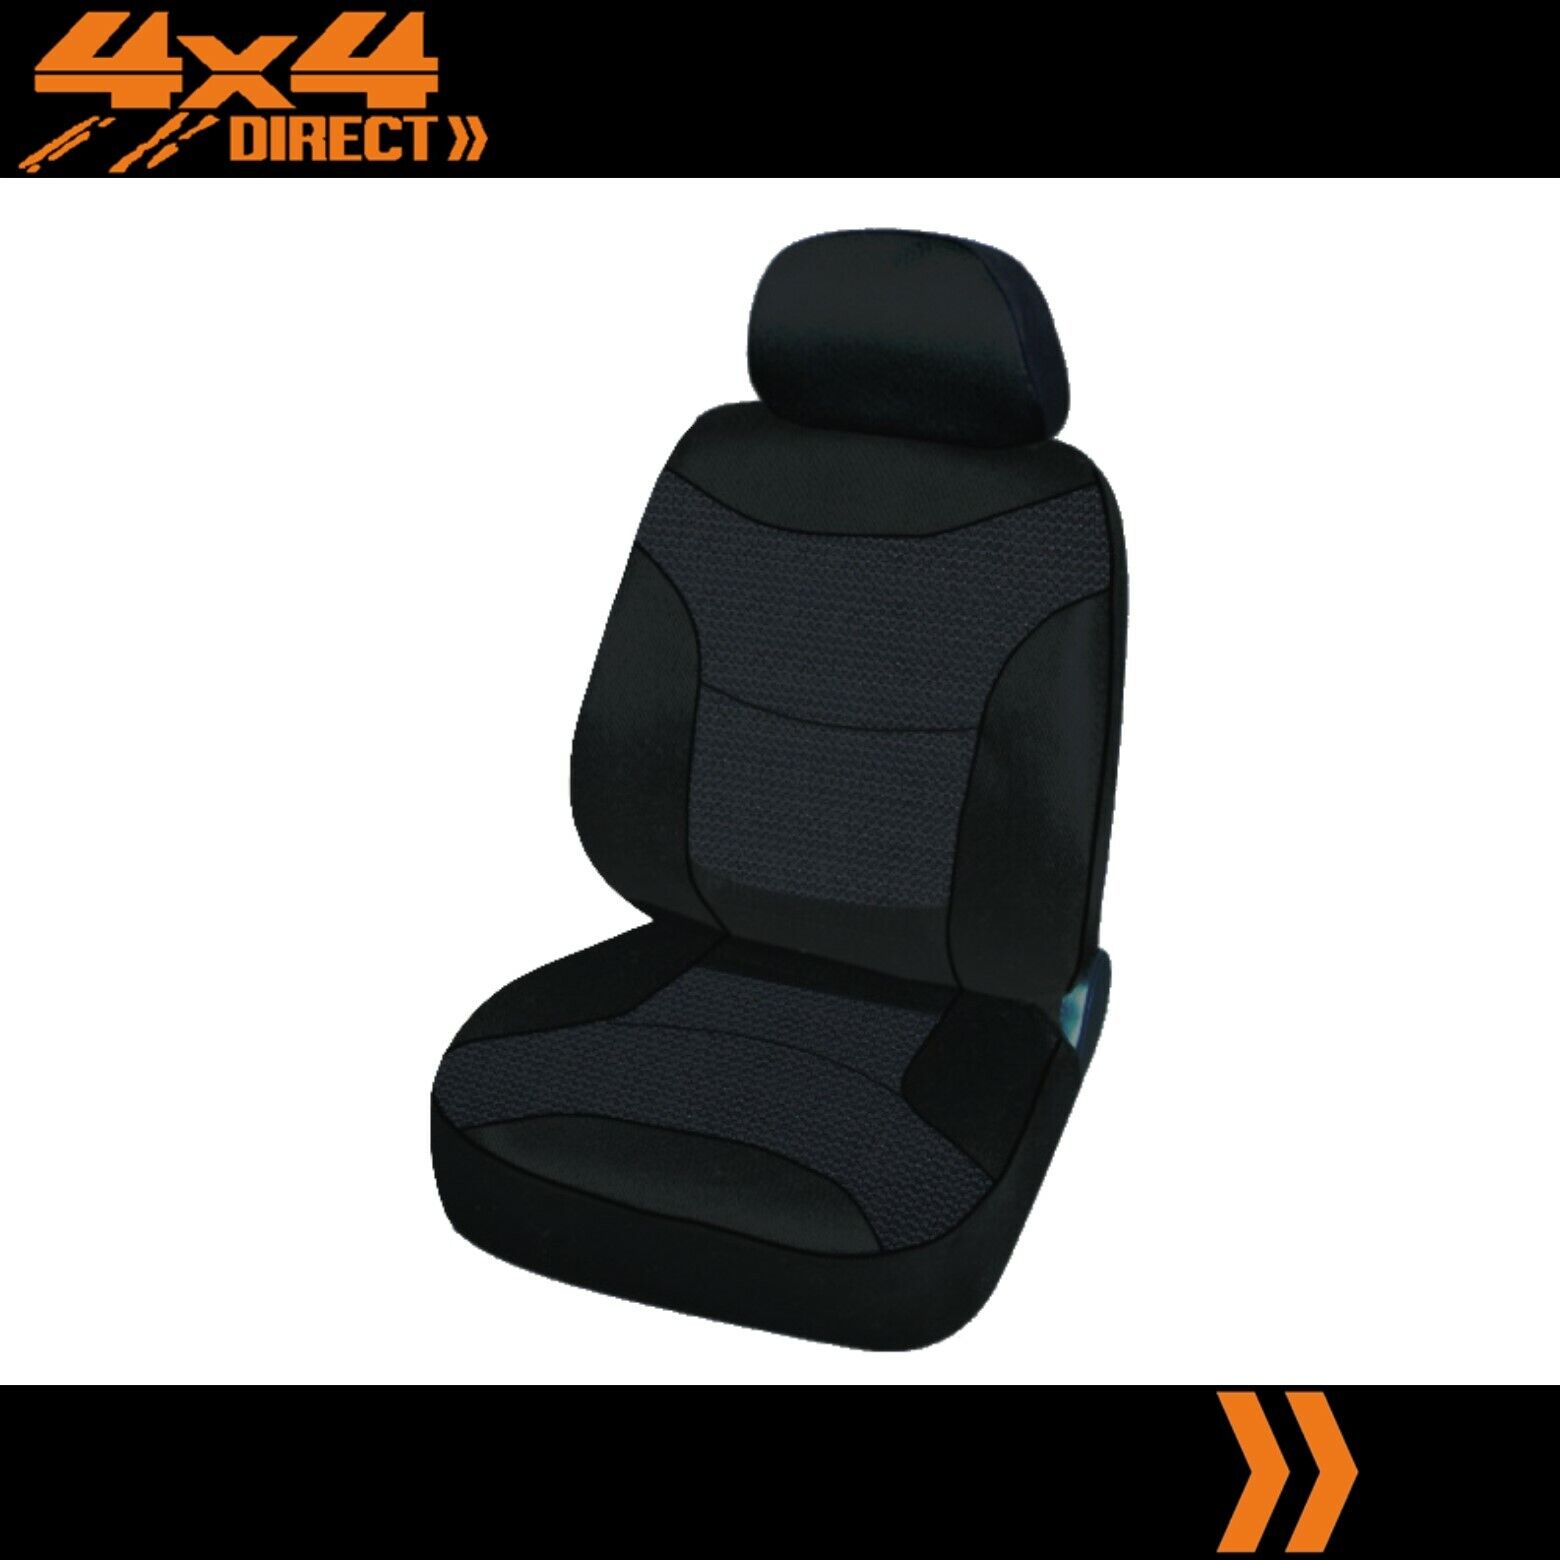 SINGLE BLACK MODERN JACQUARD SEAT COVER FOR FORD GT